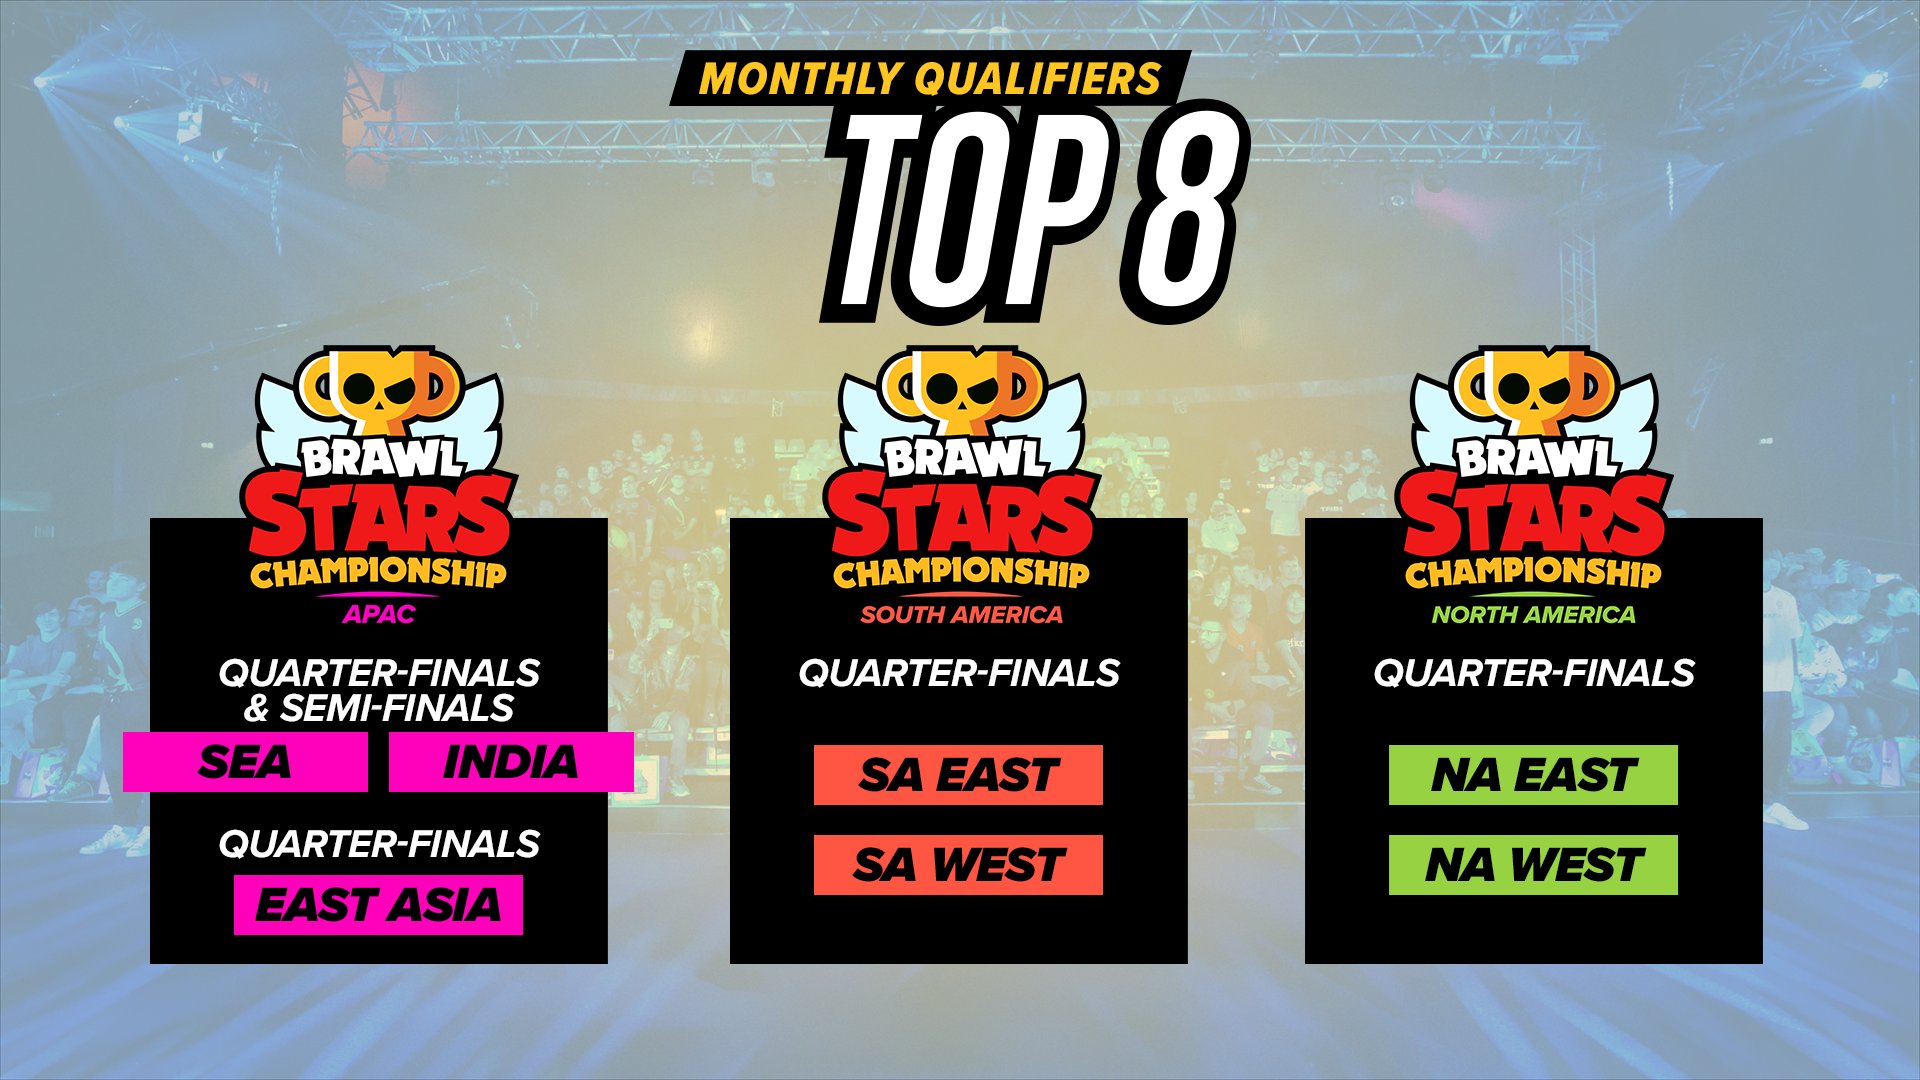 Brawl Stars Esports on X: This weekend we're BACK with the Brawl Stars  Championship June Monthly Finals! 🔥 Saturday kicks off at 5am UTC with  APAC & EMEA Sunday at 3pm UTC